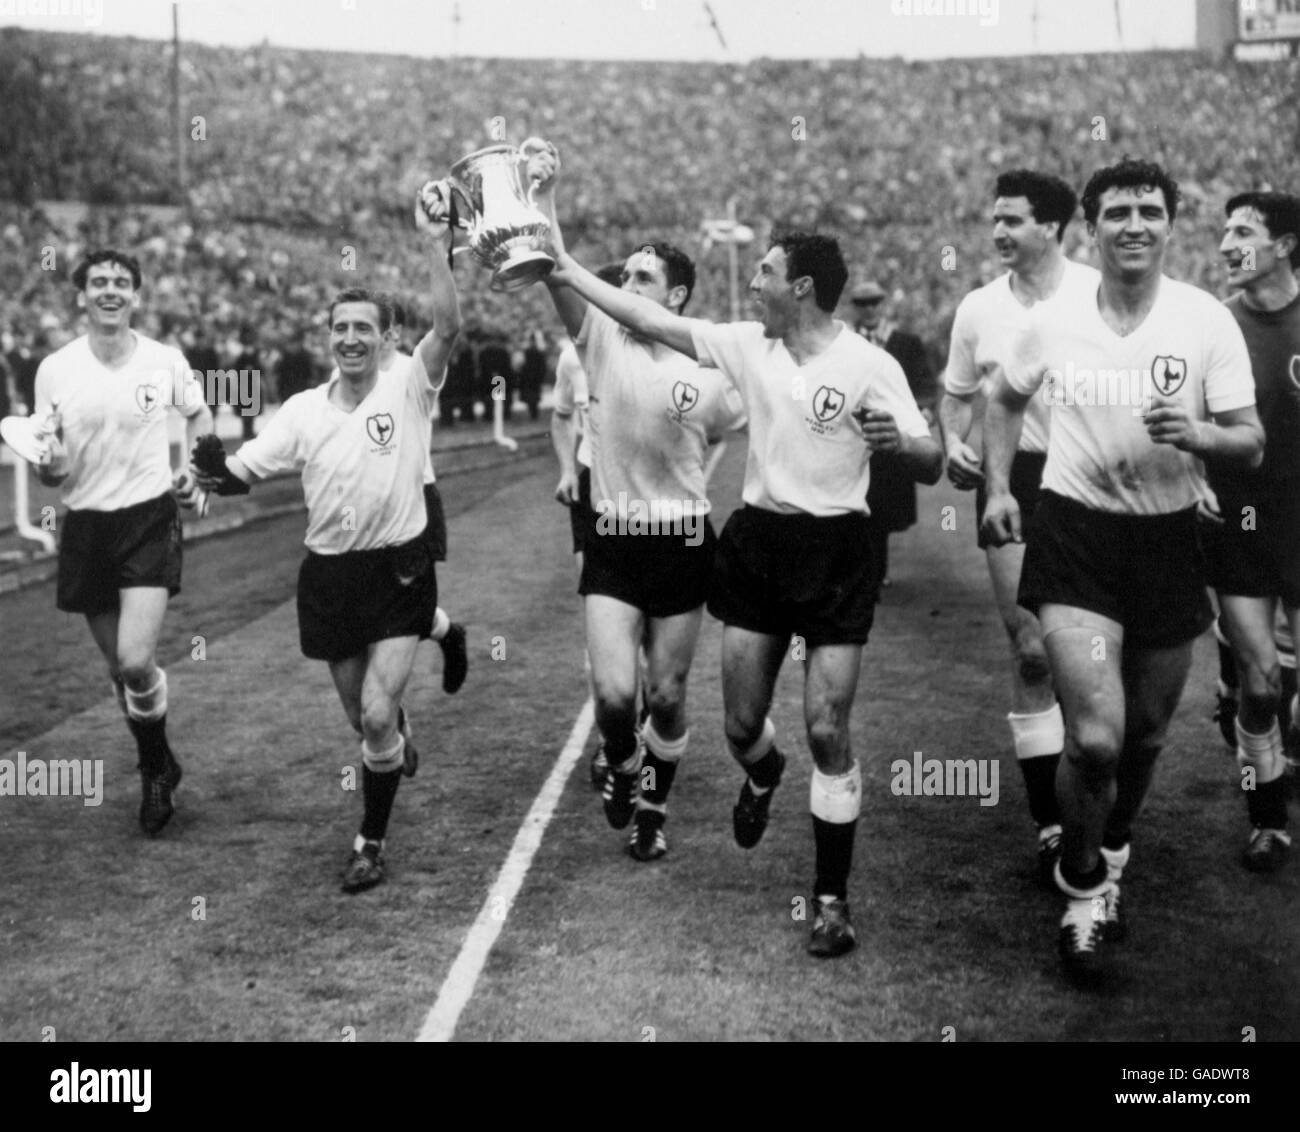 (L-R) il trionfante Tottenham Hotspur team sfilare la fa Cup intorno a Wembley: Ron Henry, Cliff Jones, Dave Mackay, Jimmy Greaves, Maurice Norman, Bobby Smith, Bill Brown Foto Stock